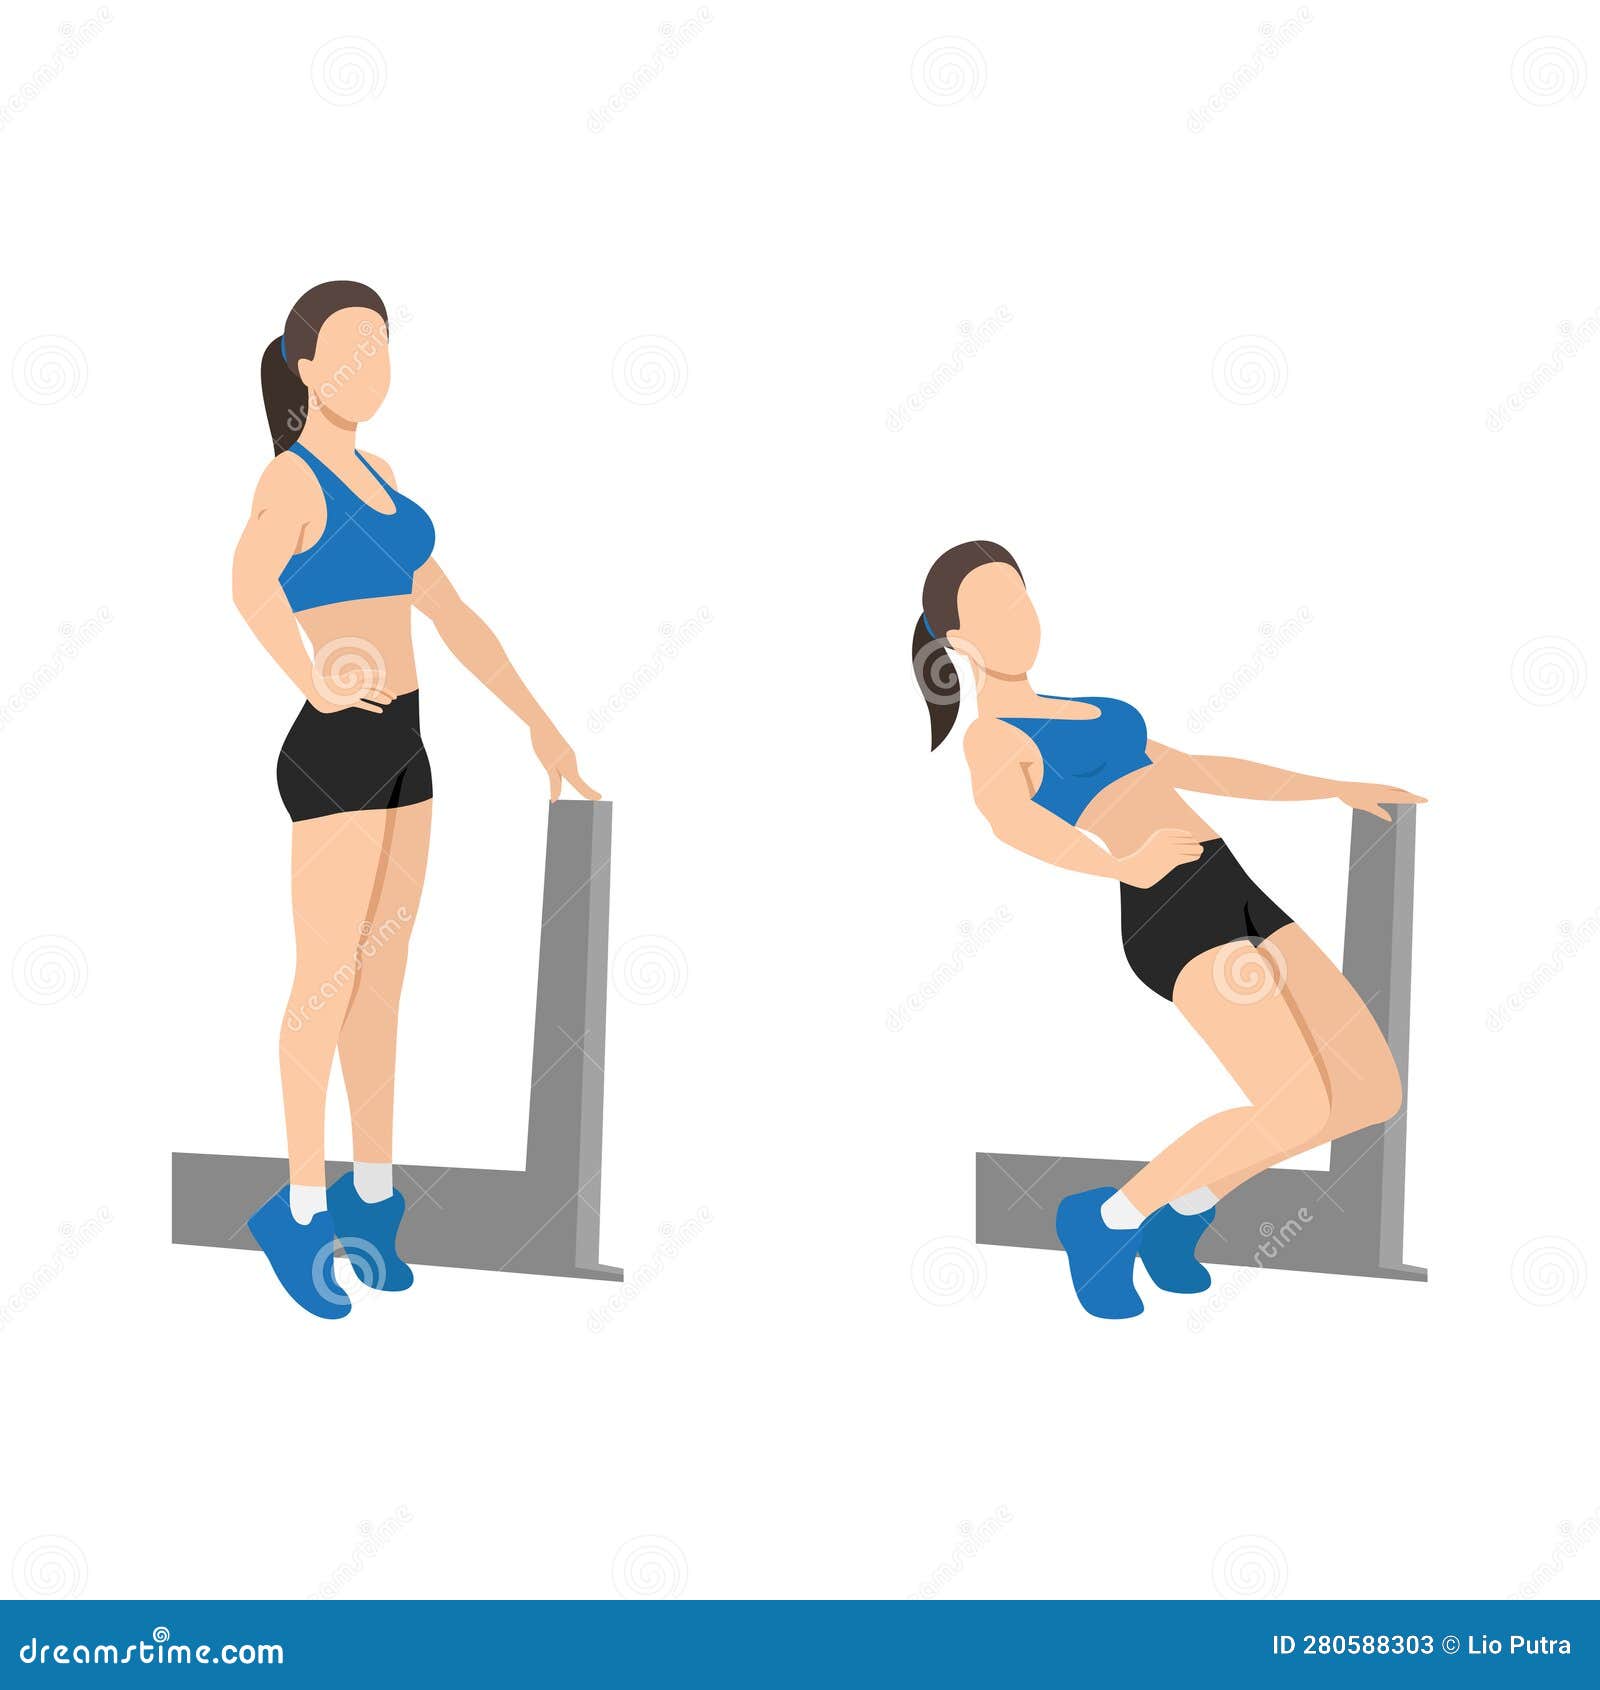 Woman Doing Sissy Squat Exercise Stock Vector - Illustration of curl,  sport: 280588303